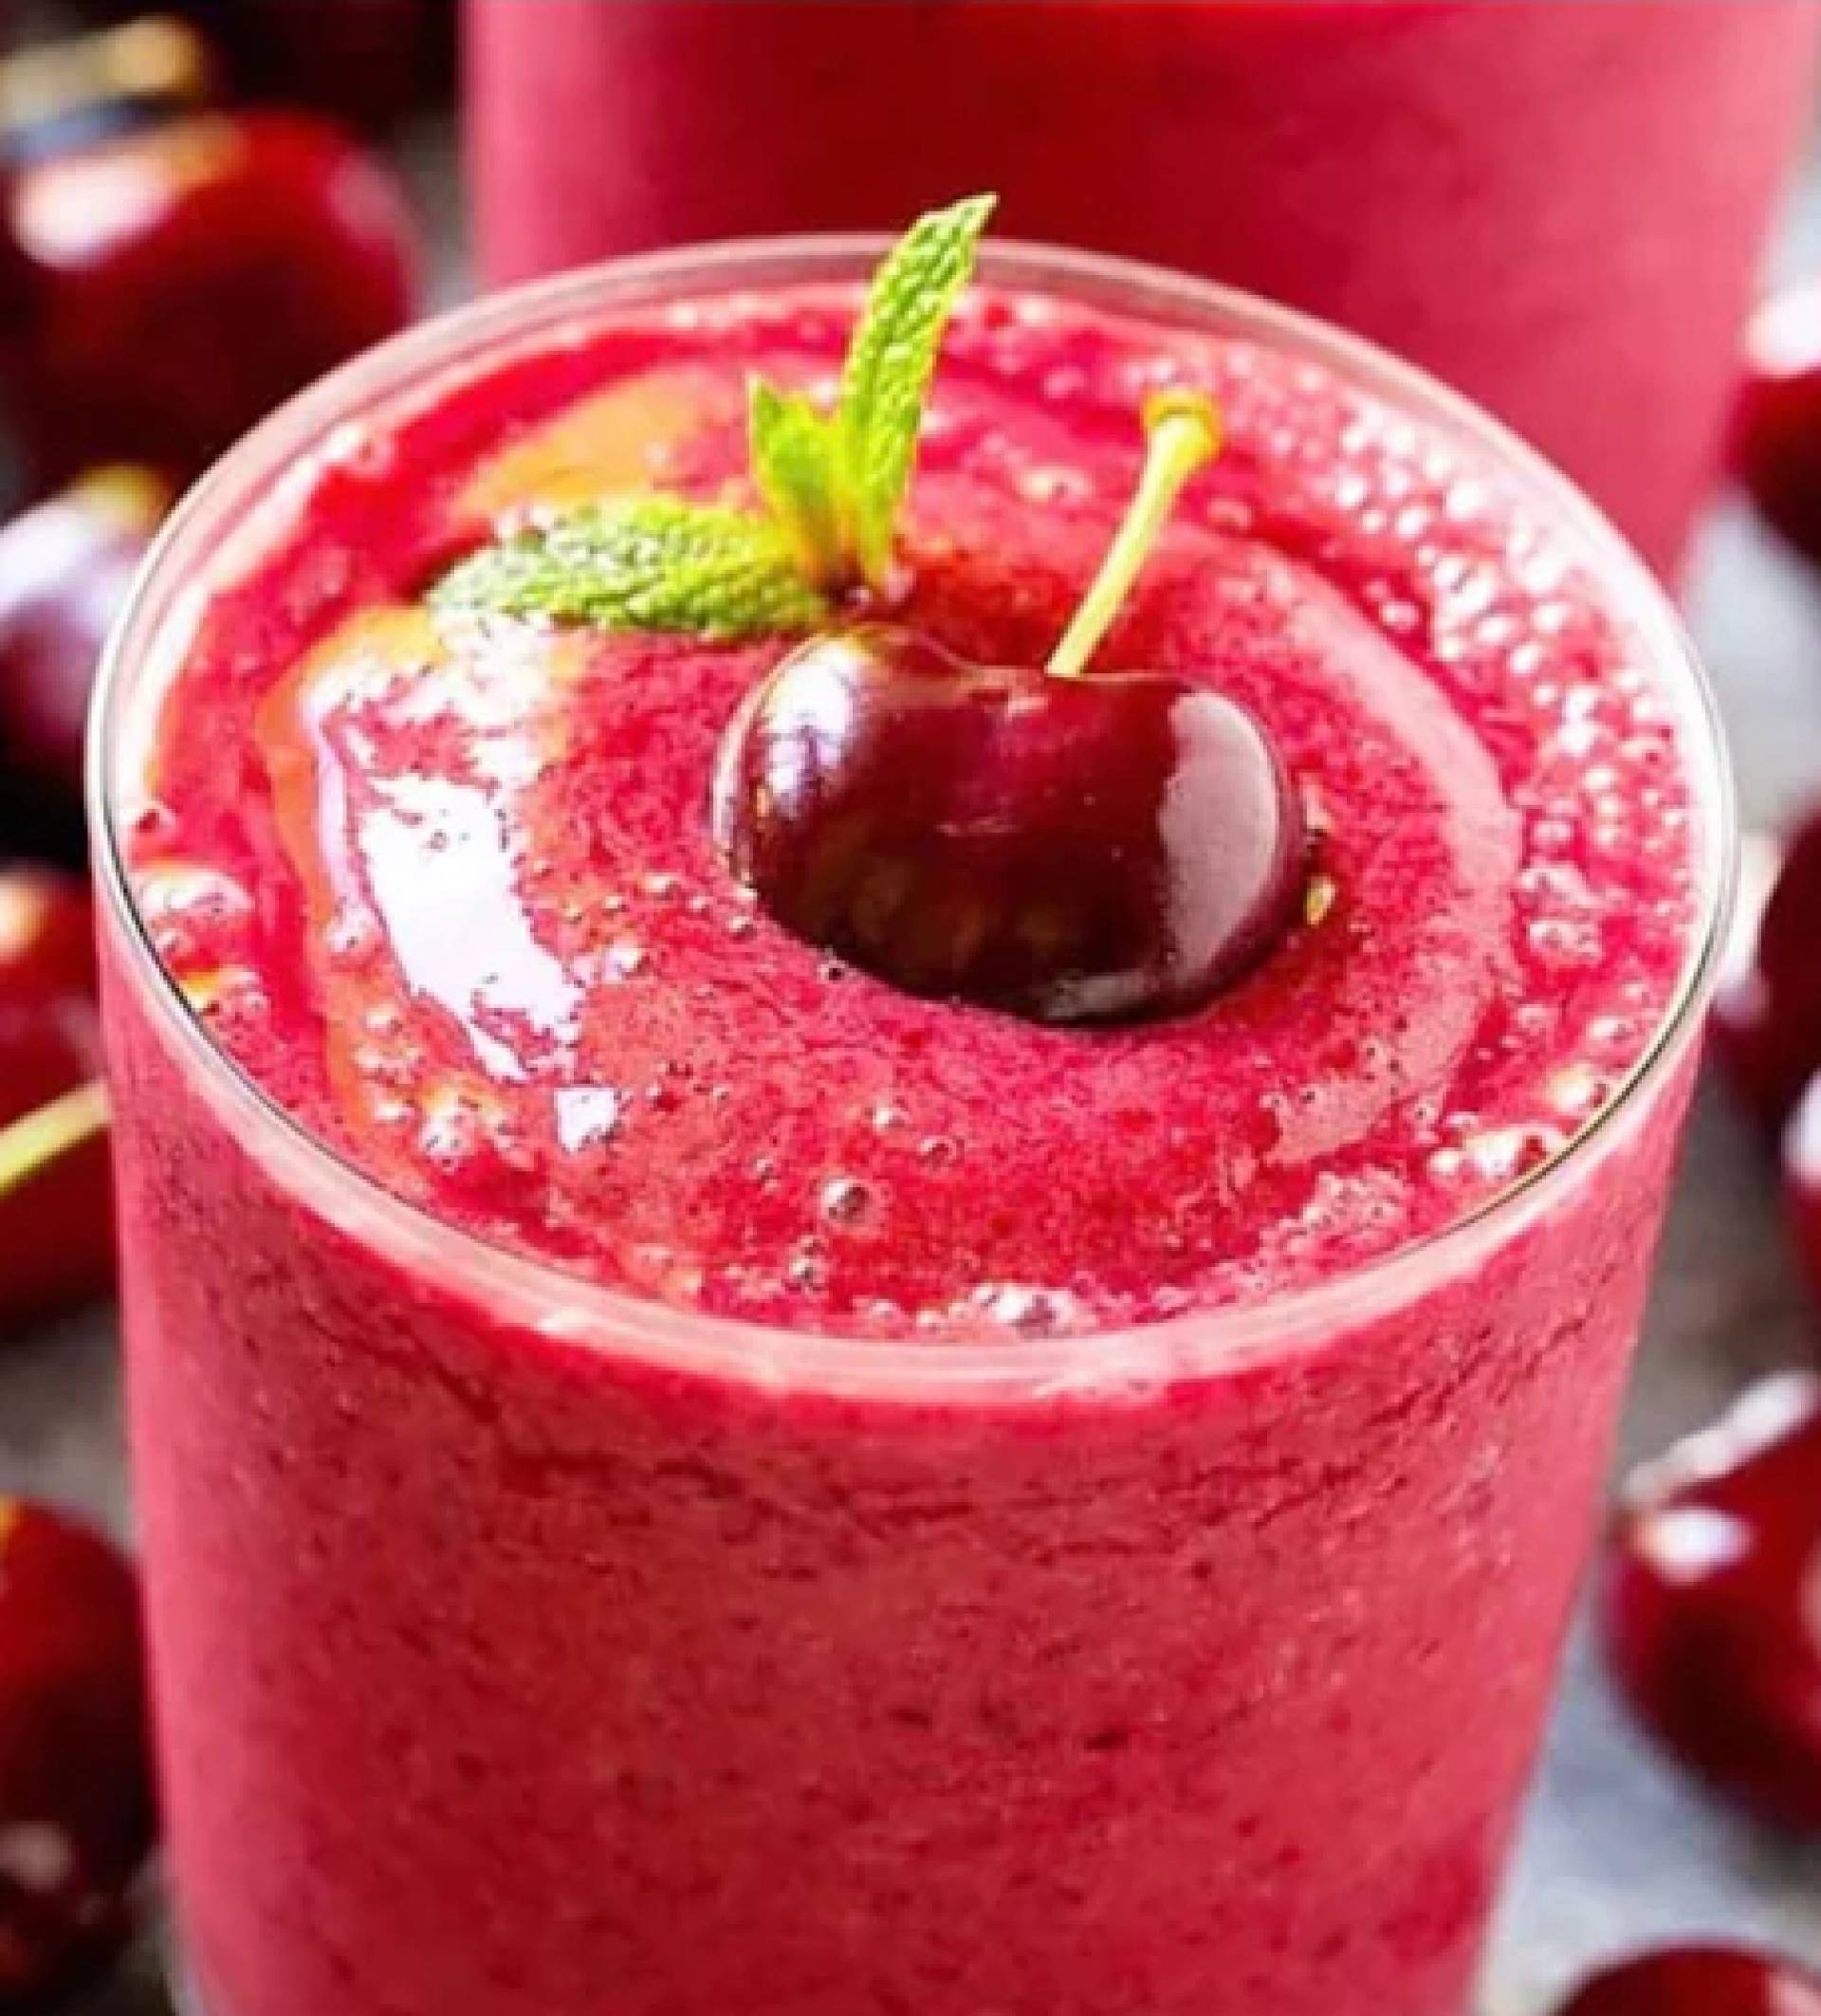 The Tropical Cherry Smoothie